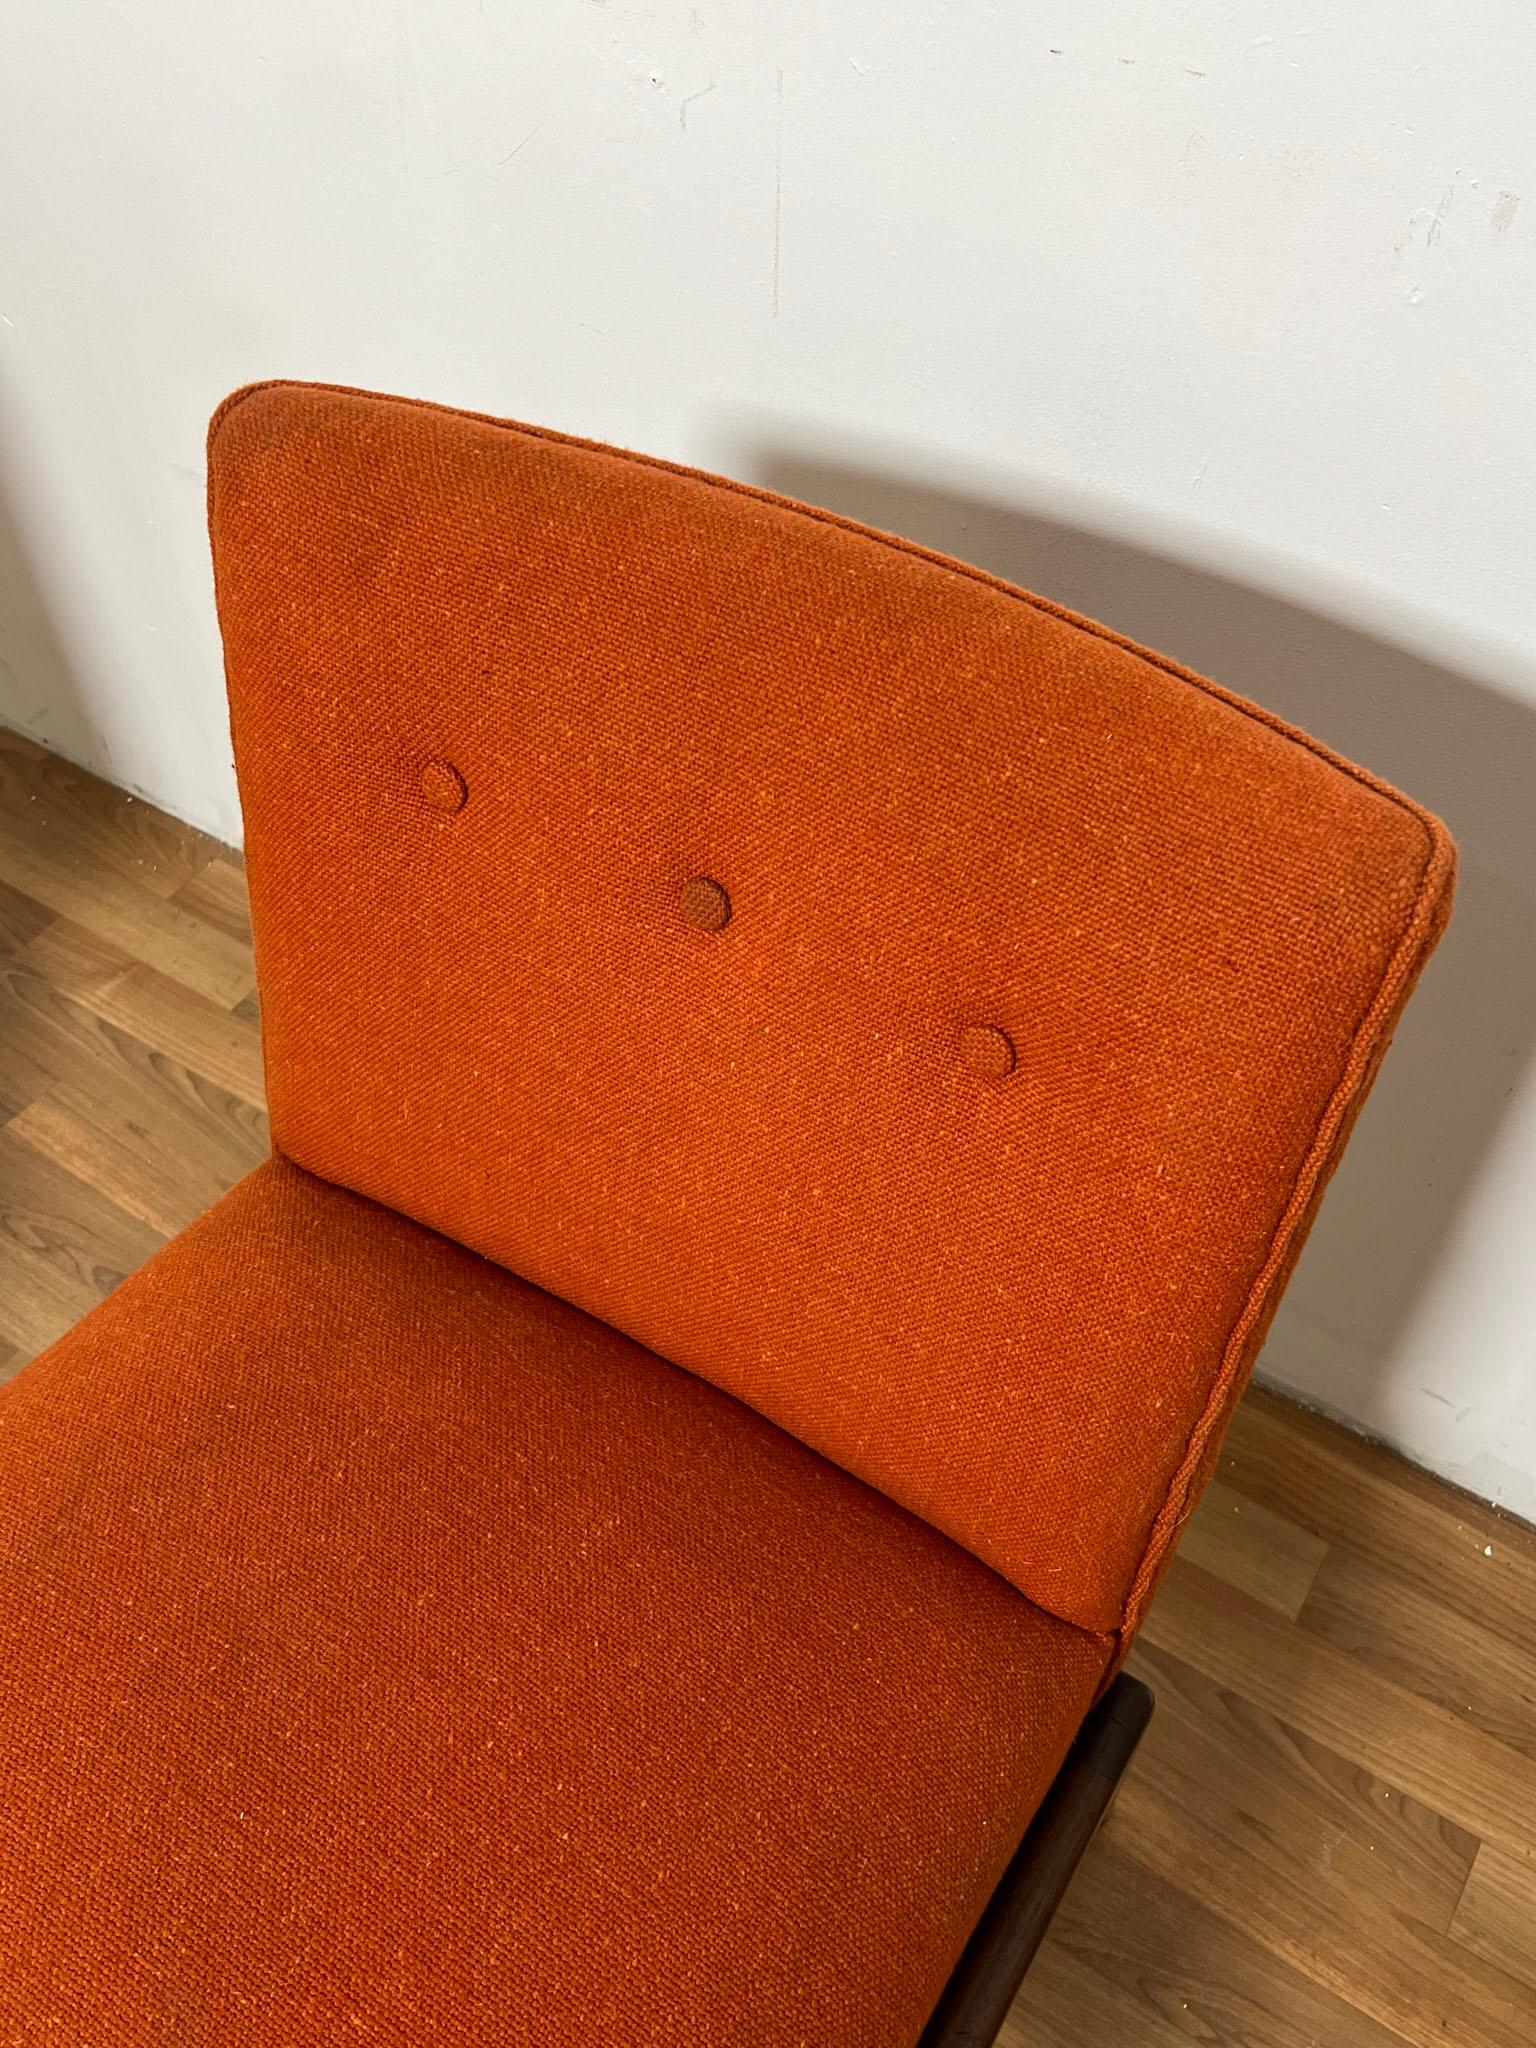 Pair of Jens Risom C-220 Lounge Chairs Circa 1950s For Sale 1